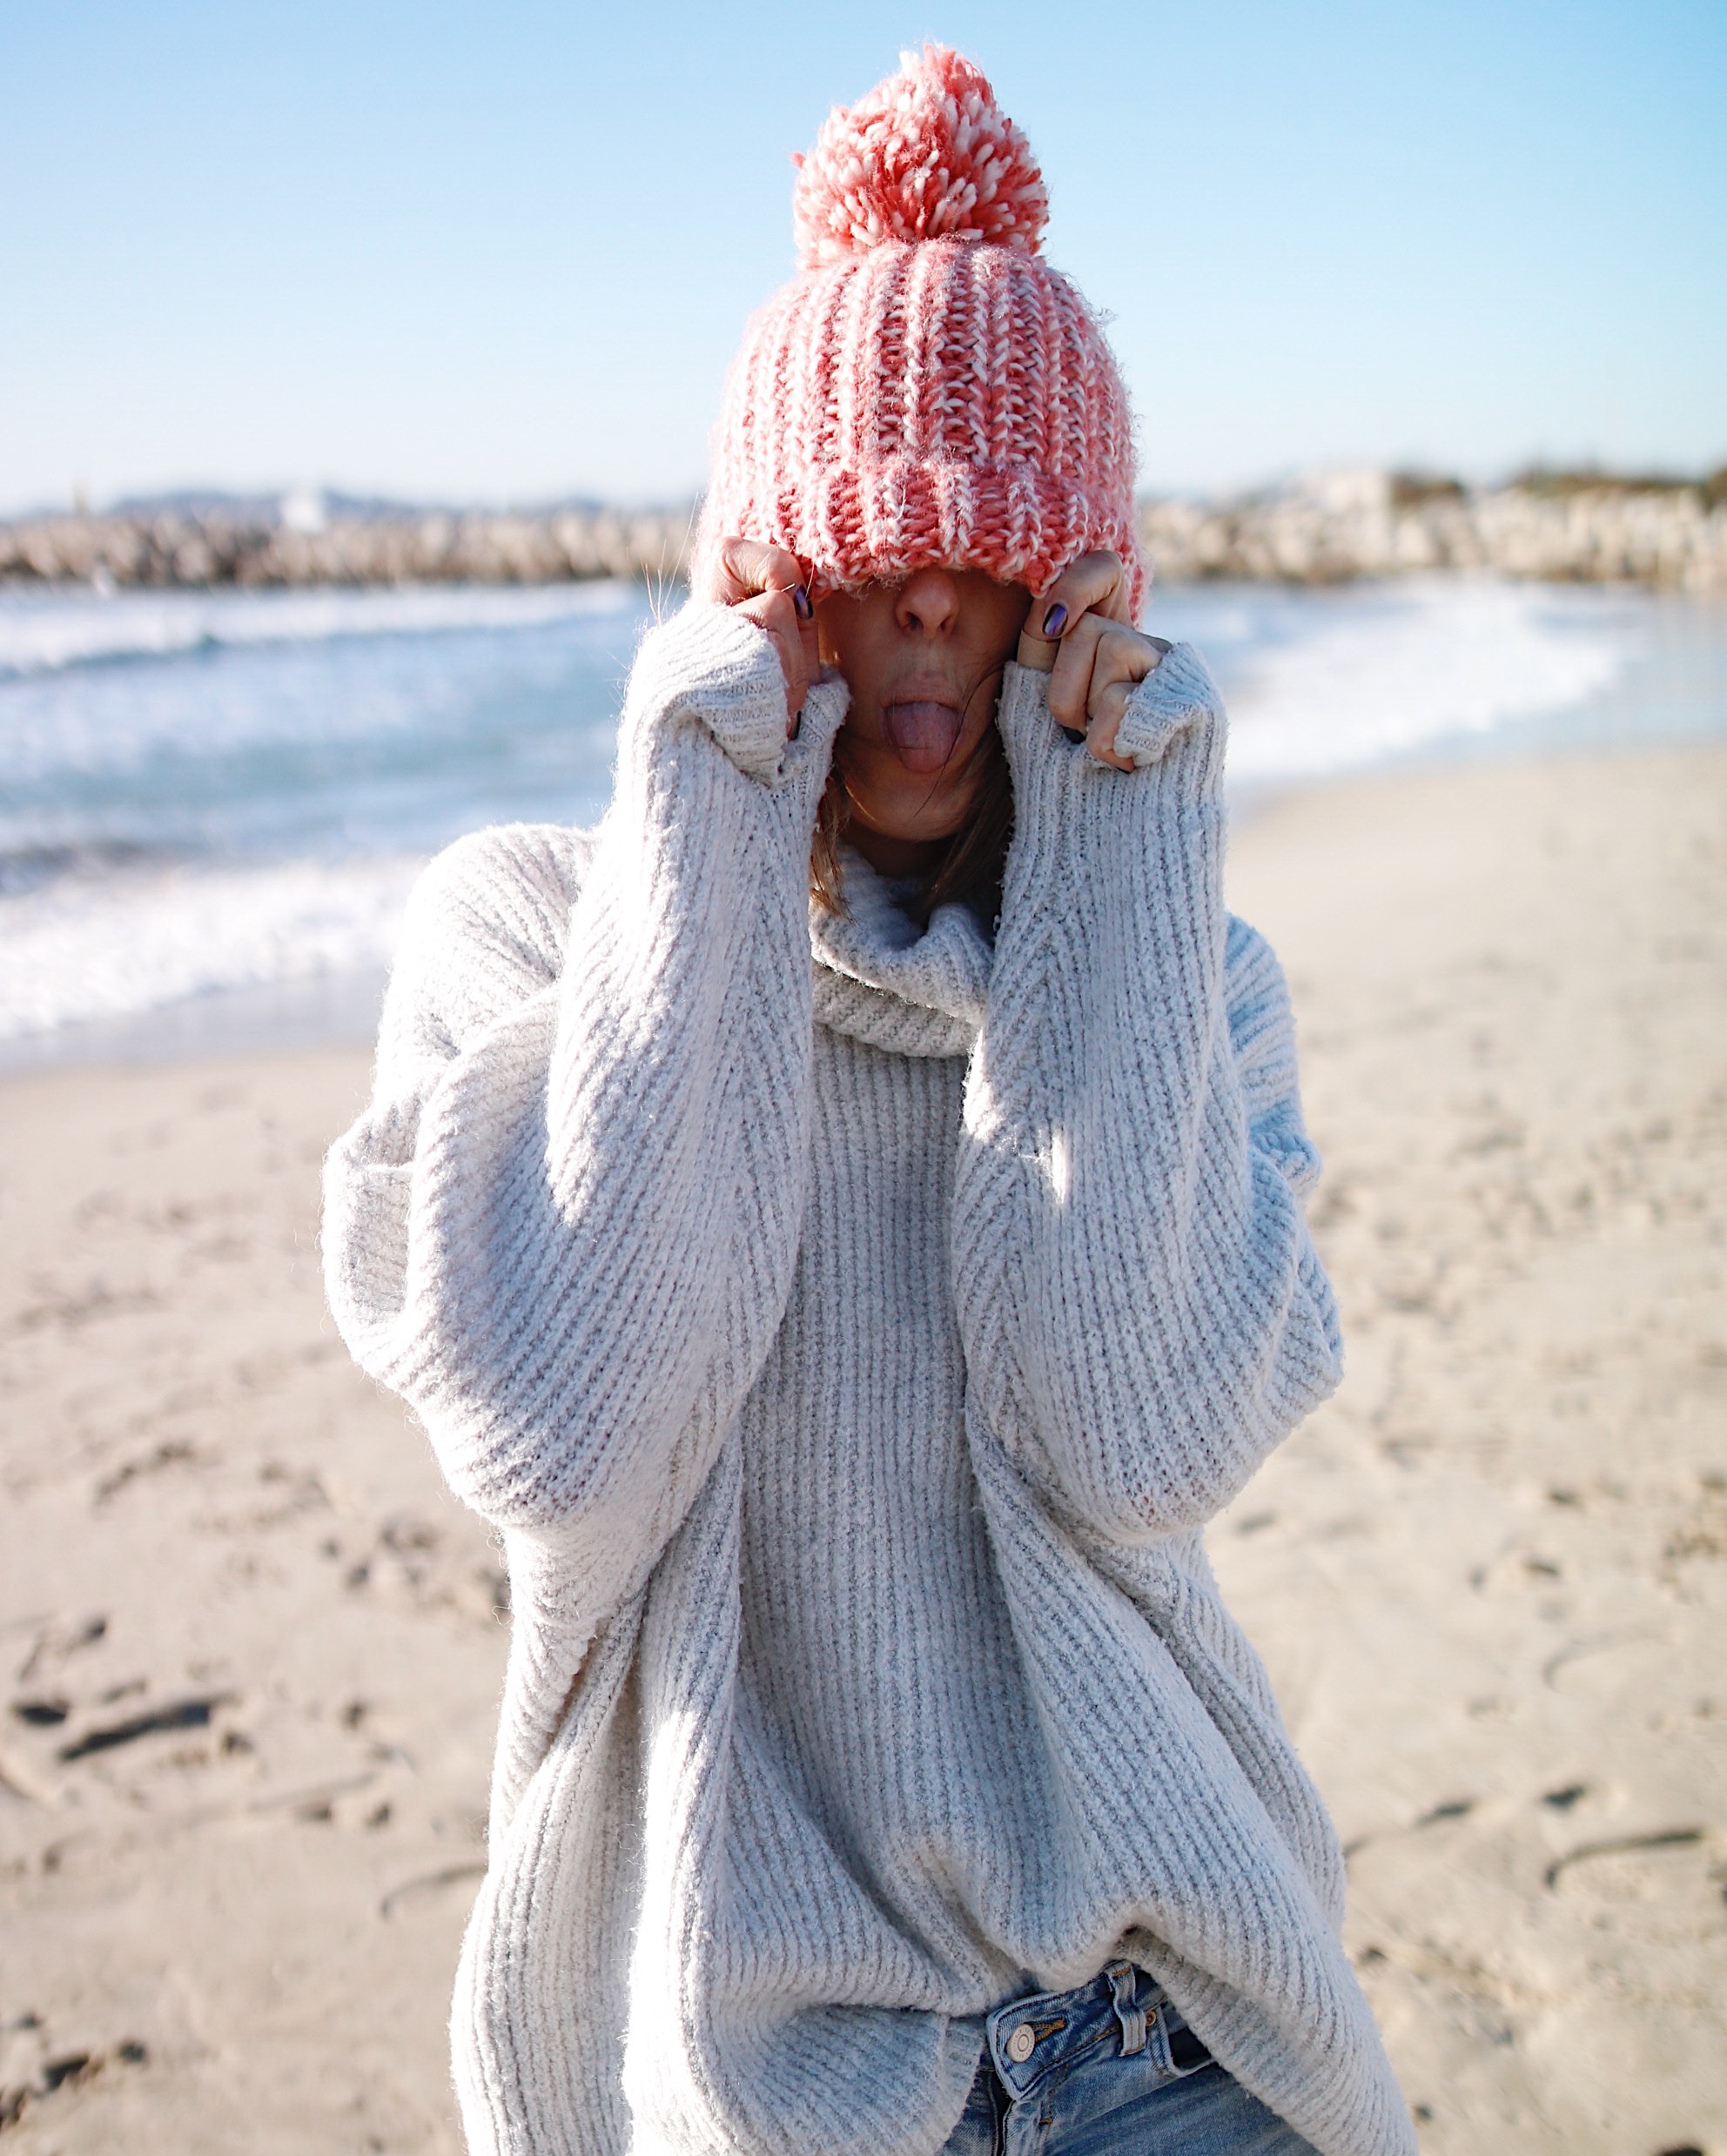 BEACH DAY with Natcho, oversize int sweater, bonnet orse, beach girl